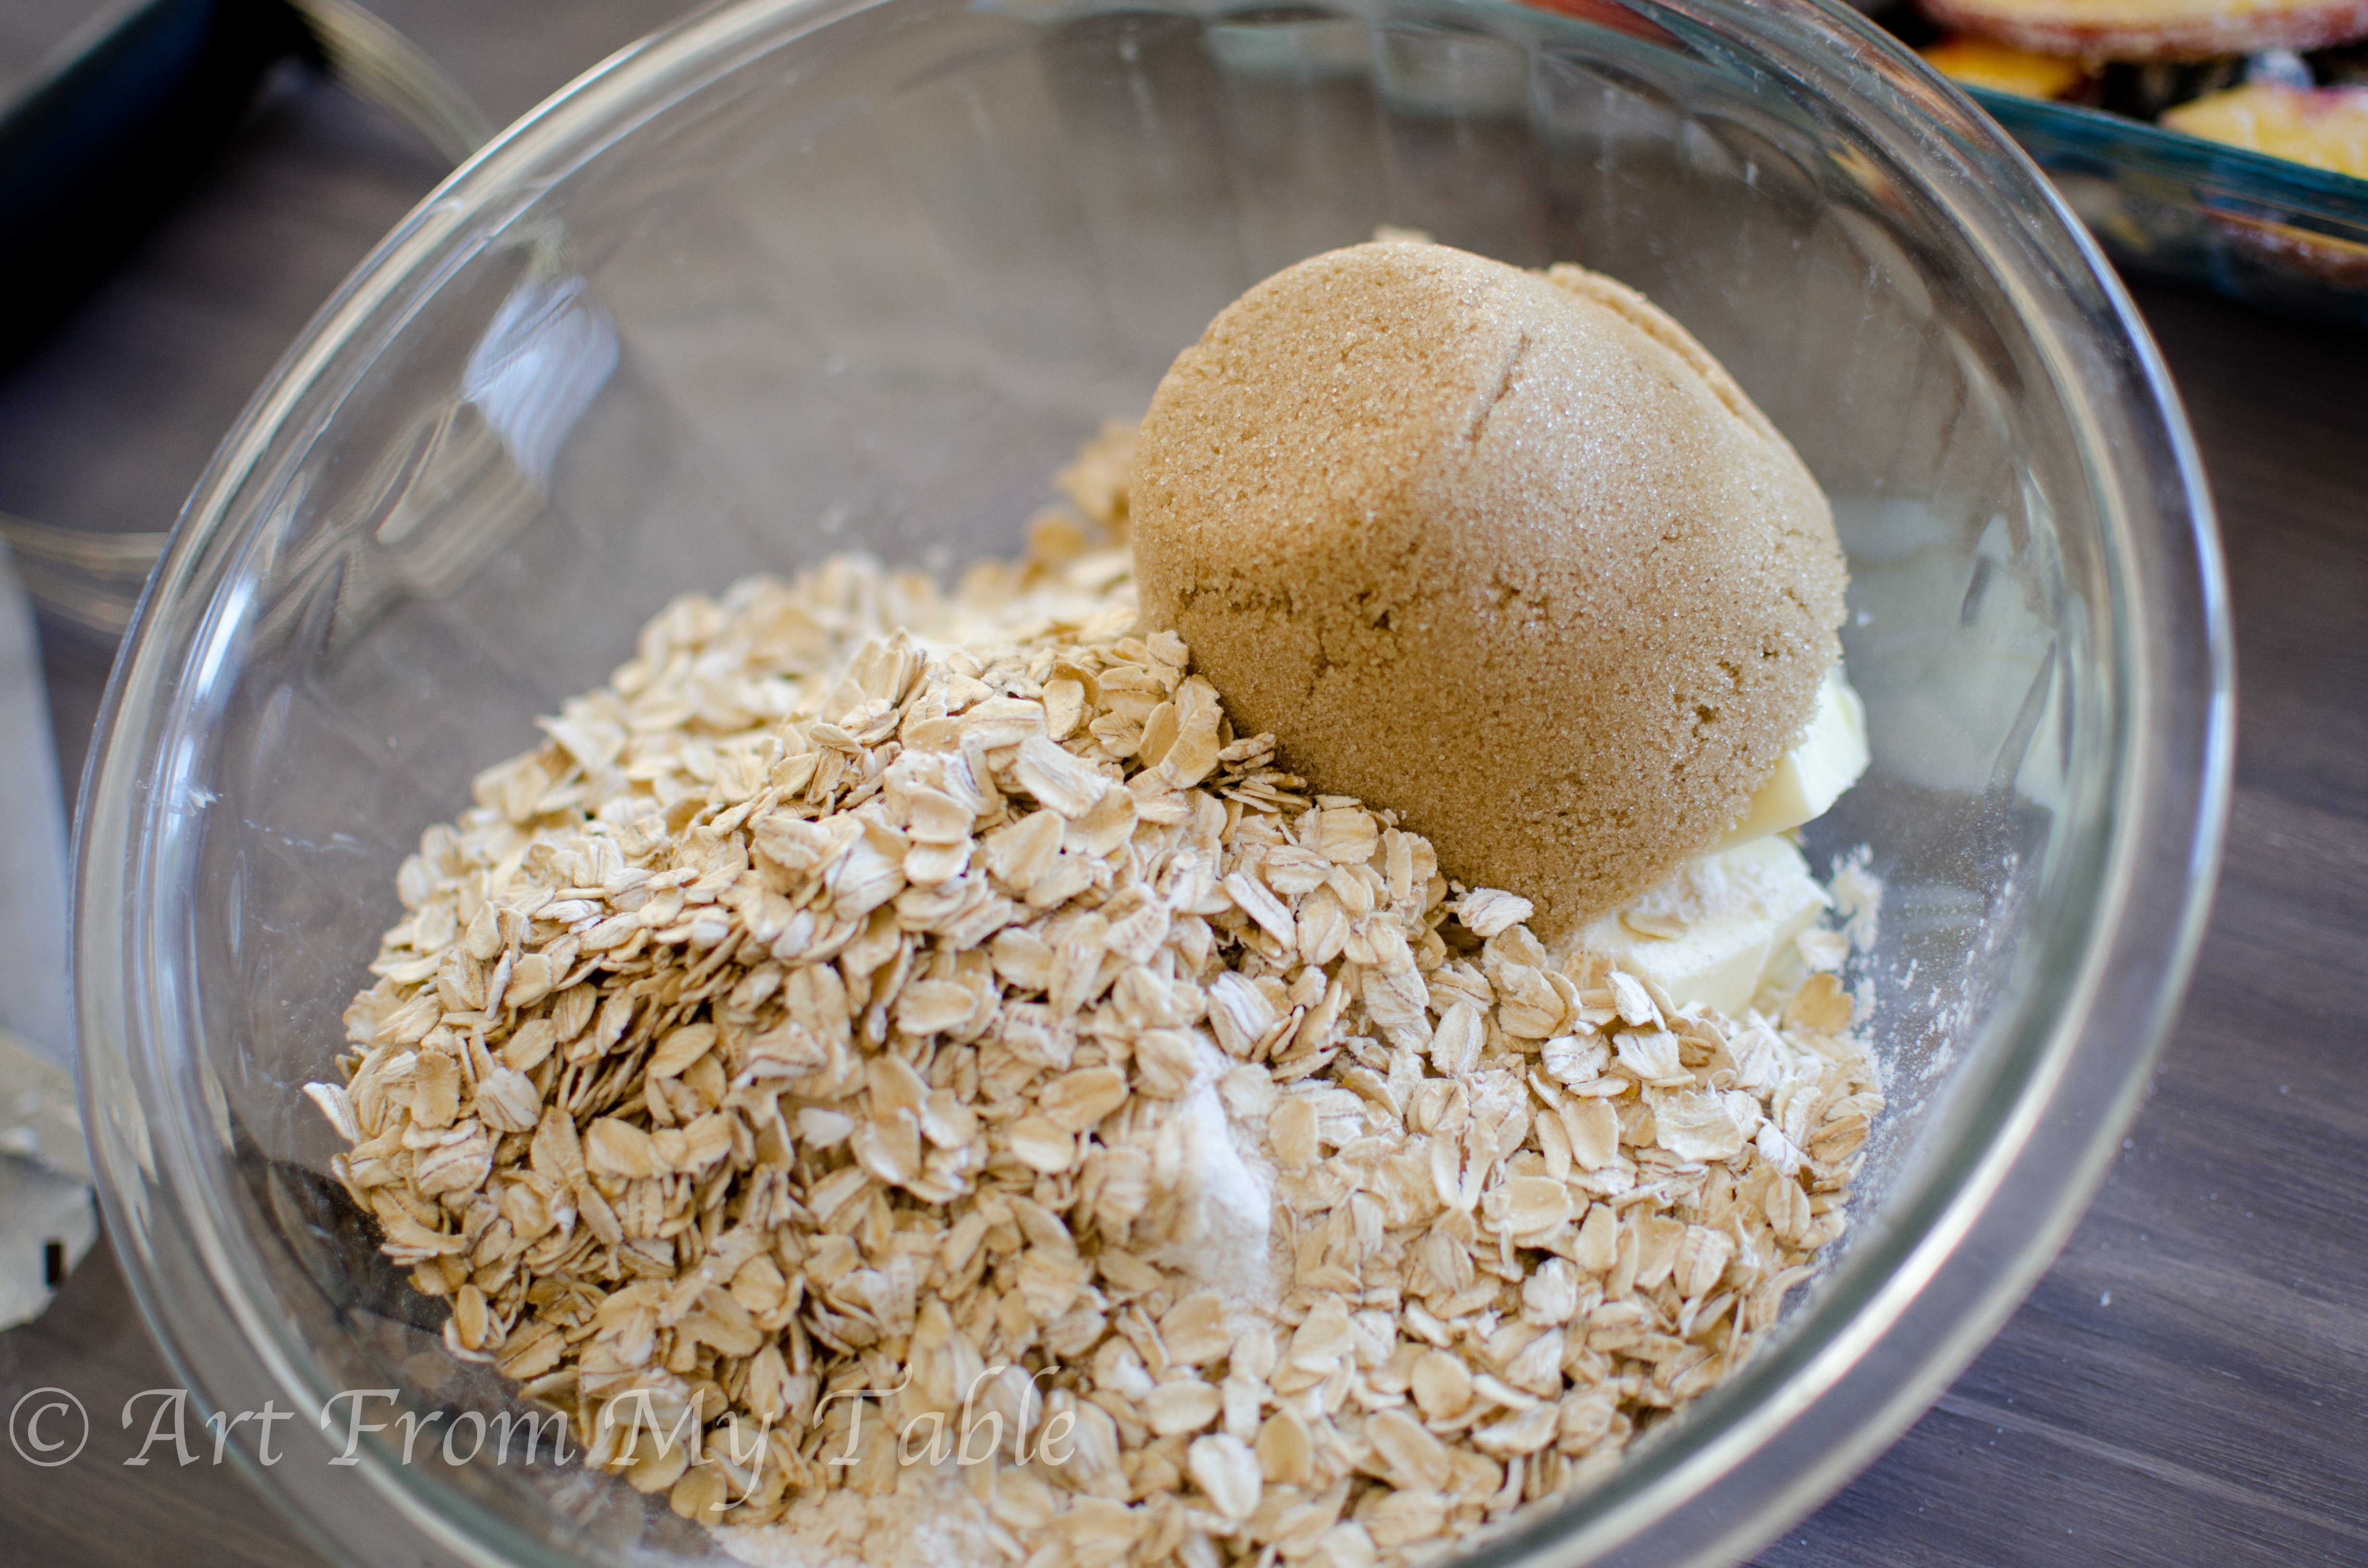 Butter, flour, brown sugar and oatmeal in a glass bowl.